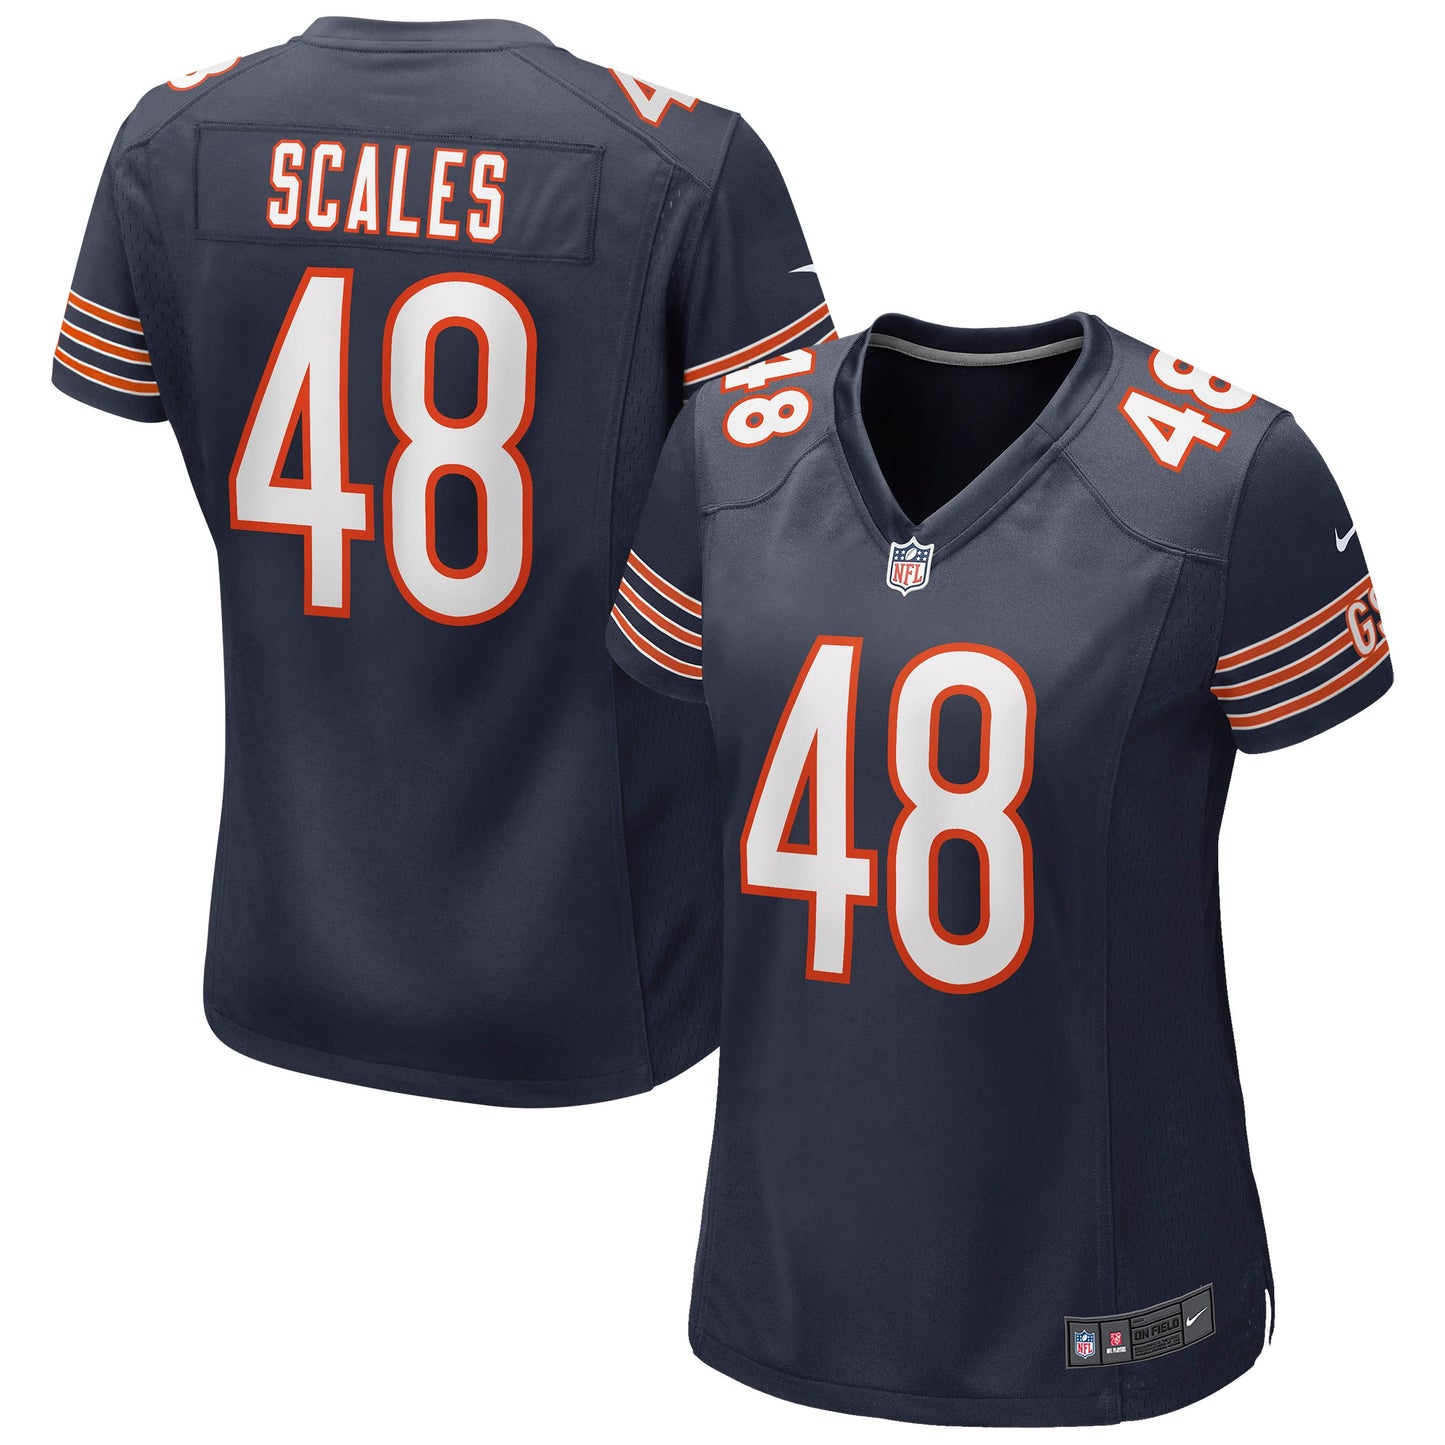 Patrick Scales Chicago Bears Nike Women's Game Jersey - Navy